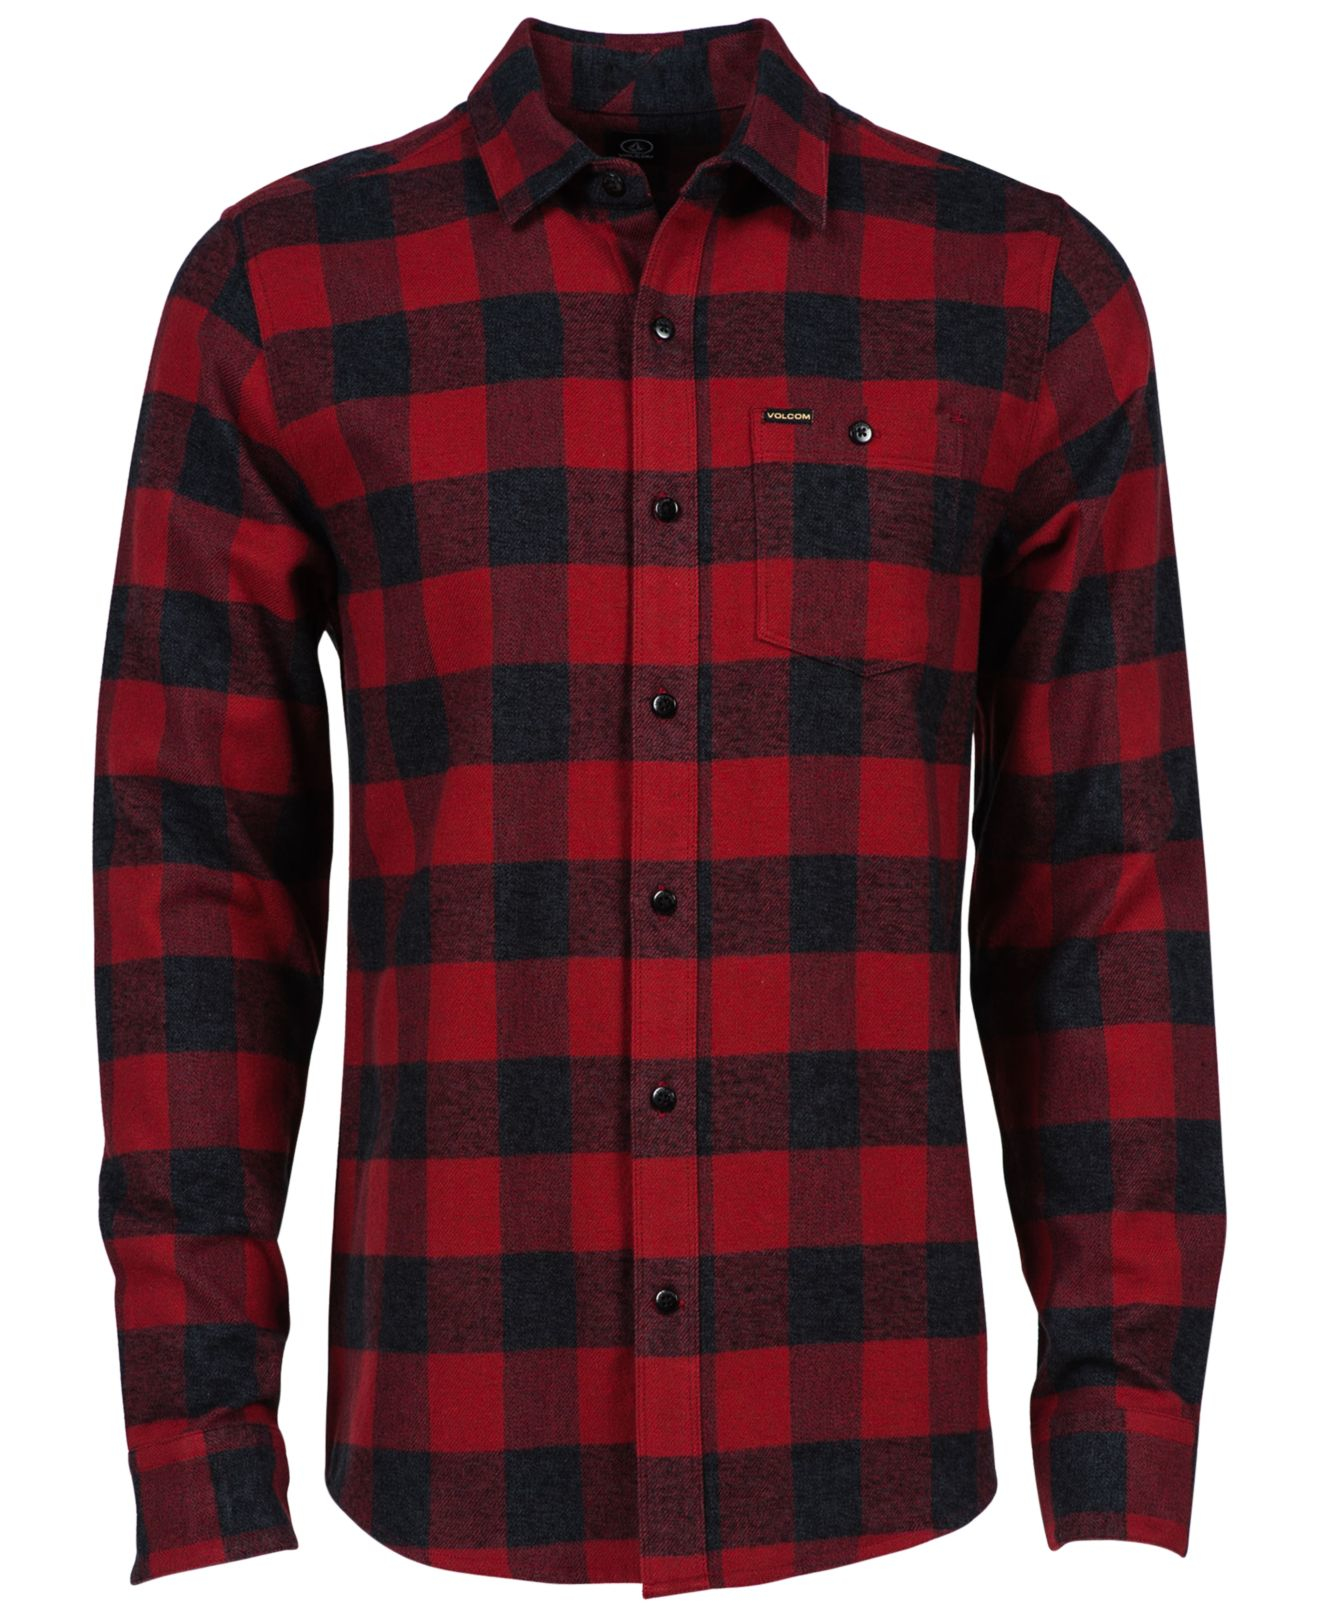 Lyst - Volcom Echo Check Flannel Long-sleeve Shirt in Red for Men